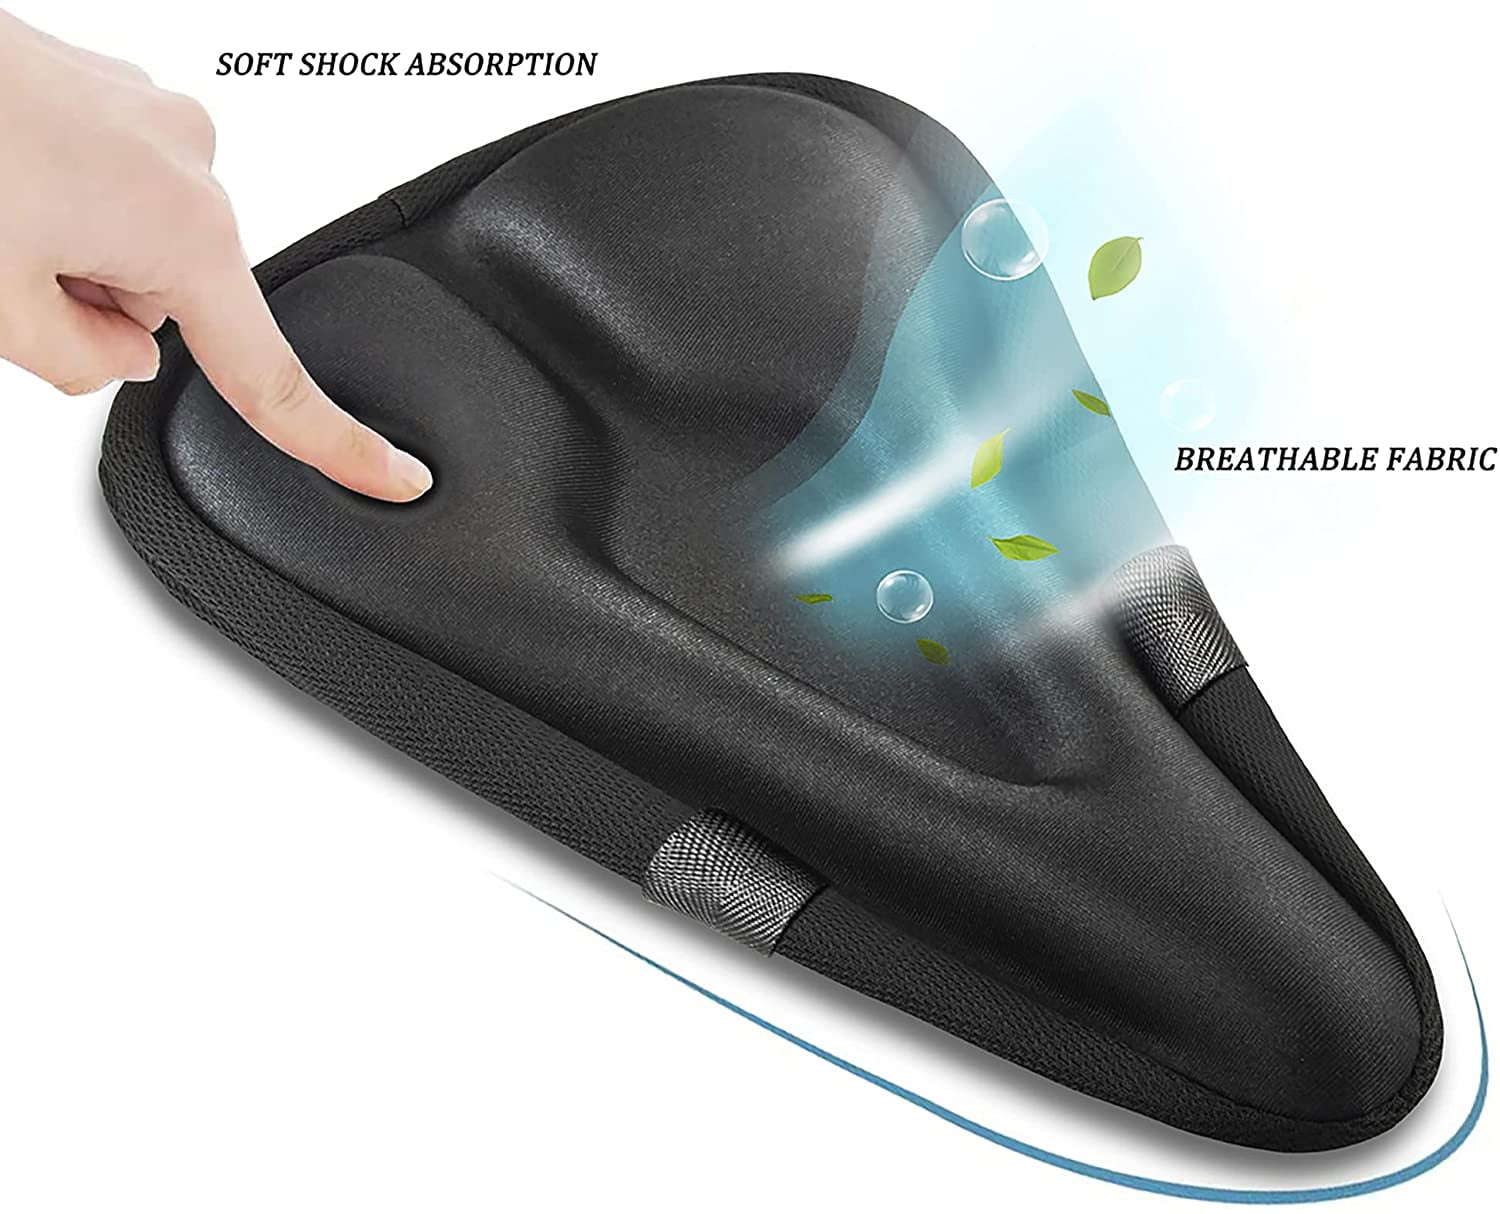 extra soft Adults Padded Gel Bike Seat Cover breathable narrow style saddles. 